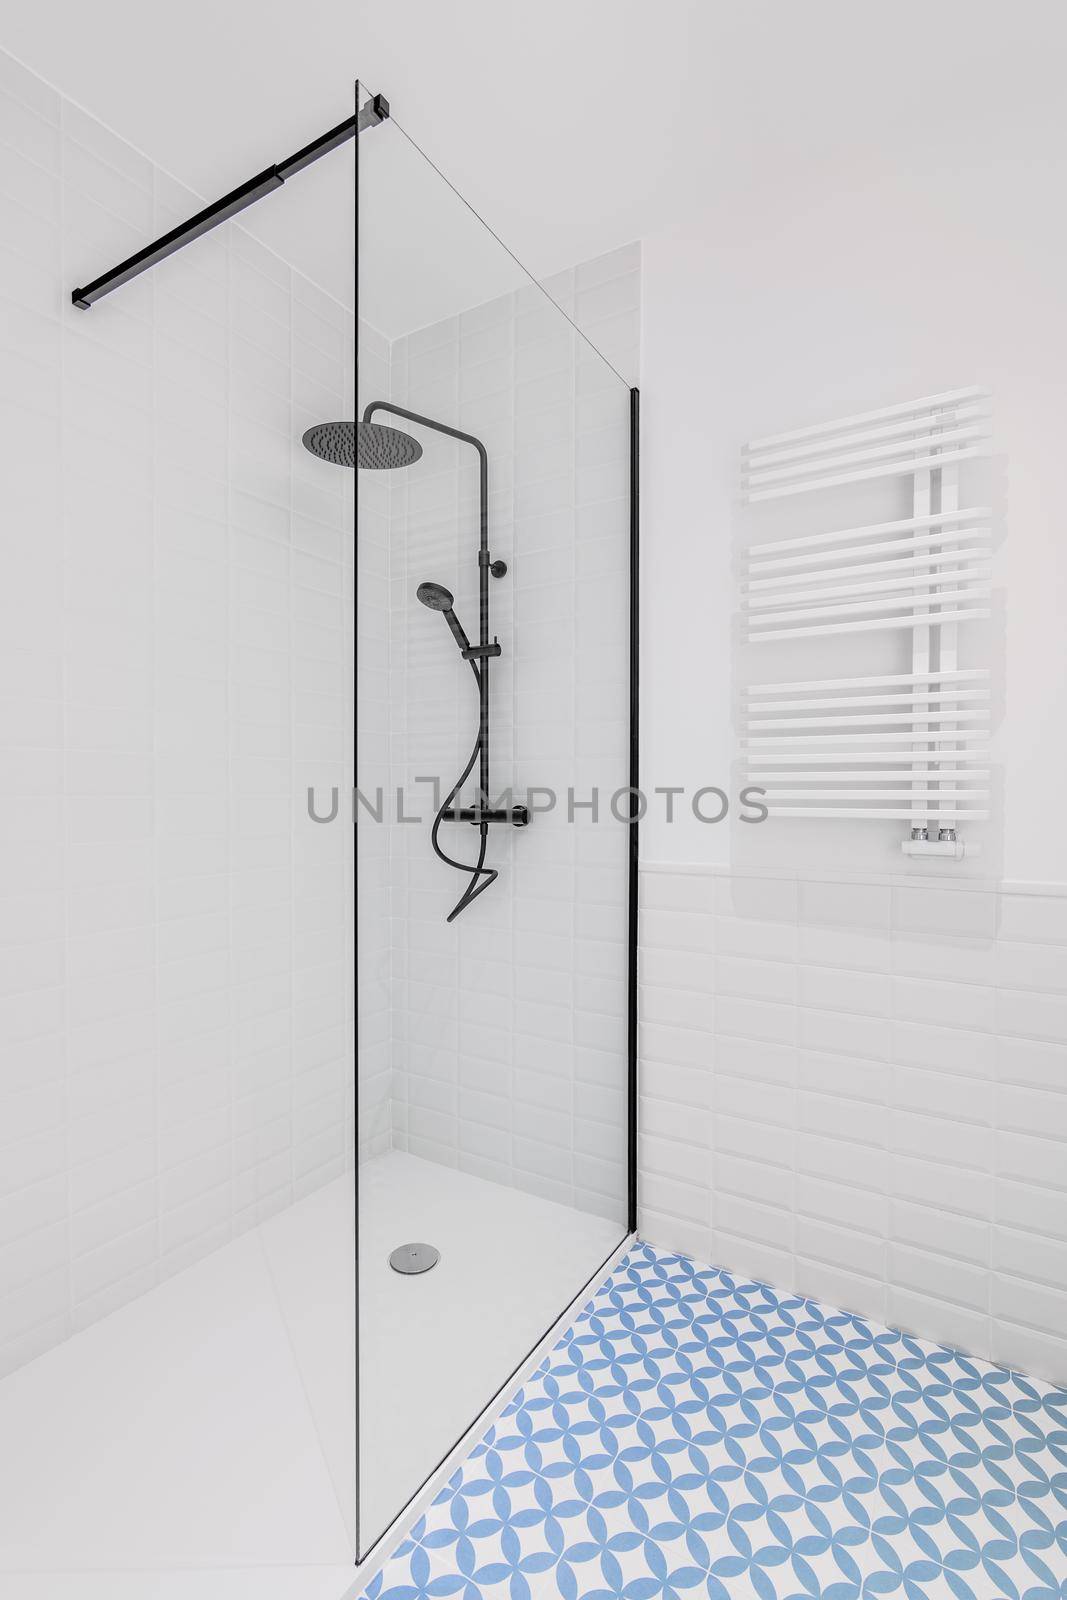 Bathroom decorated with light blue and white tiles. Modern shower zone with big rain head, hand held shower and glass door